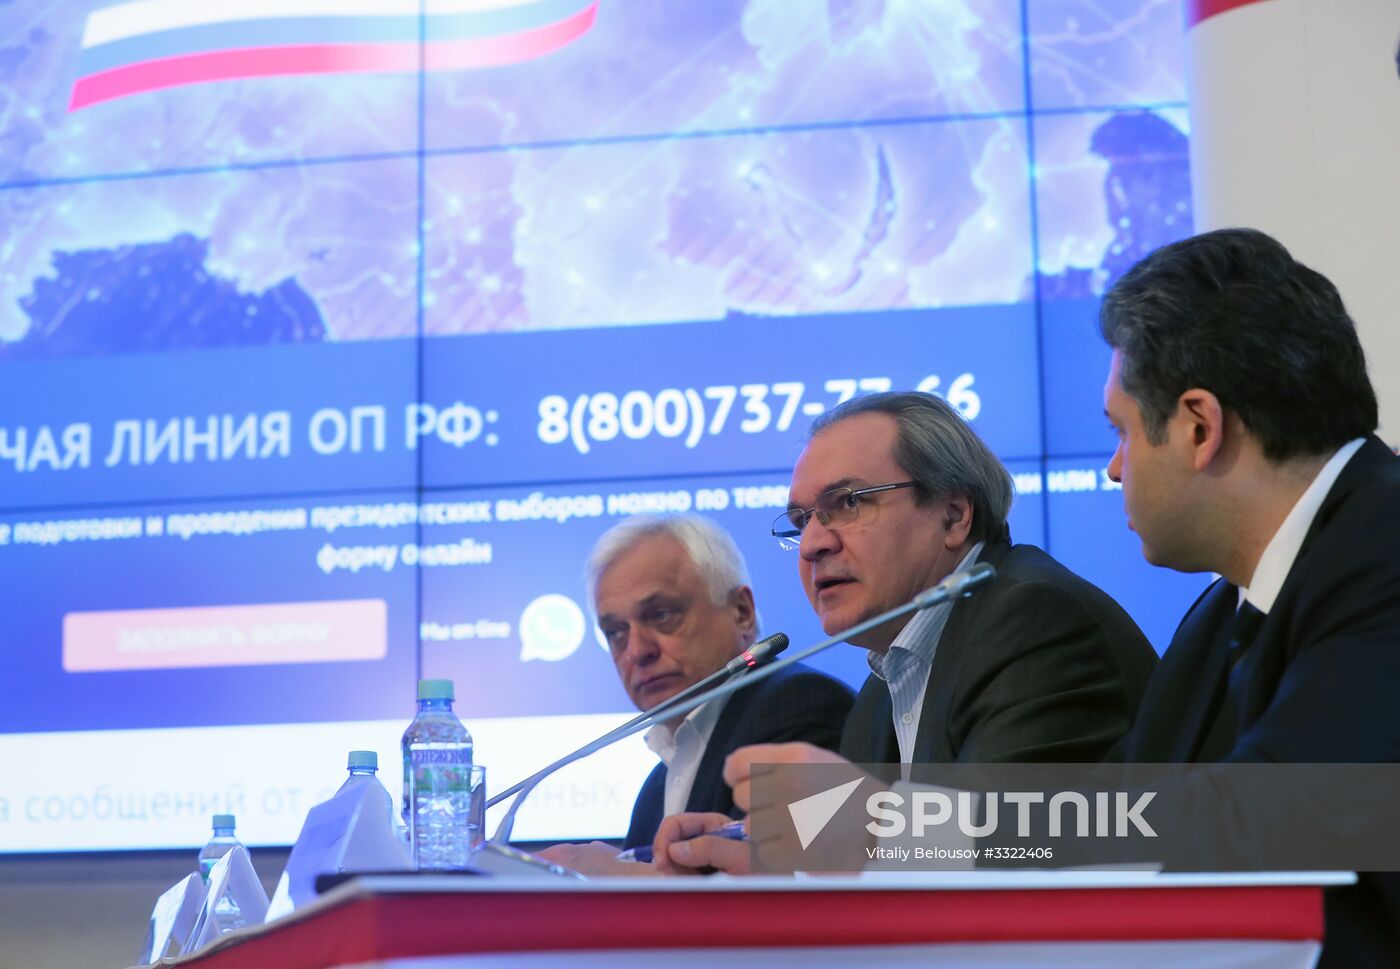 Situation center monitoring Russian presidential election